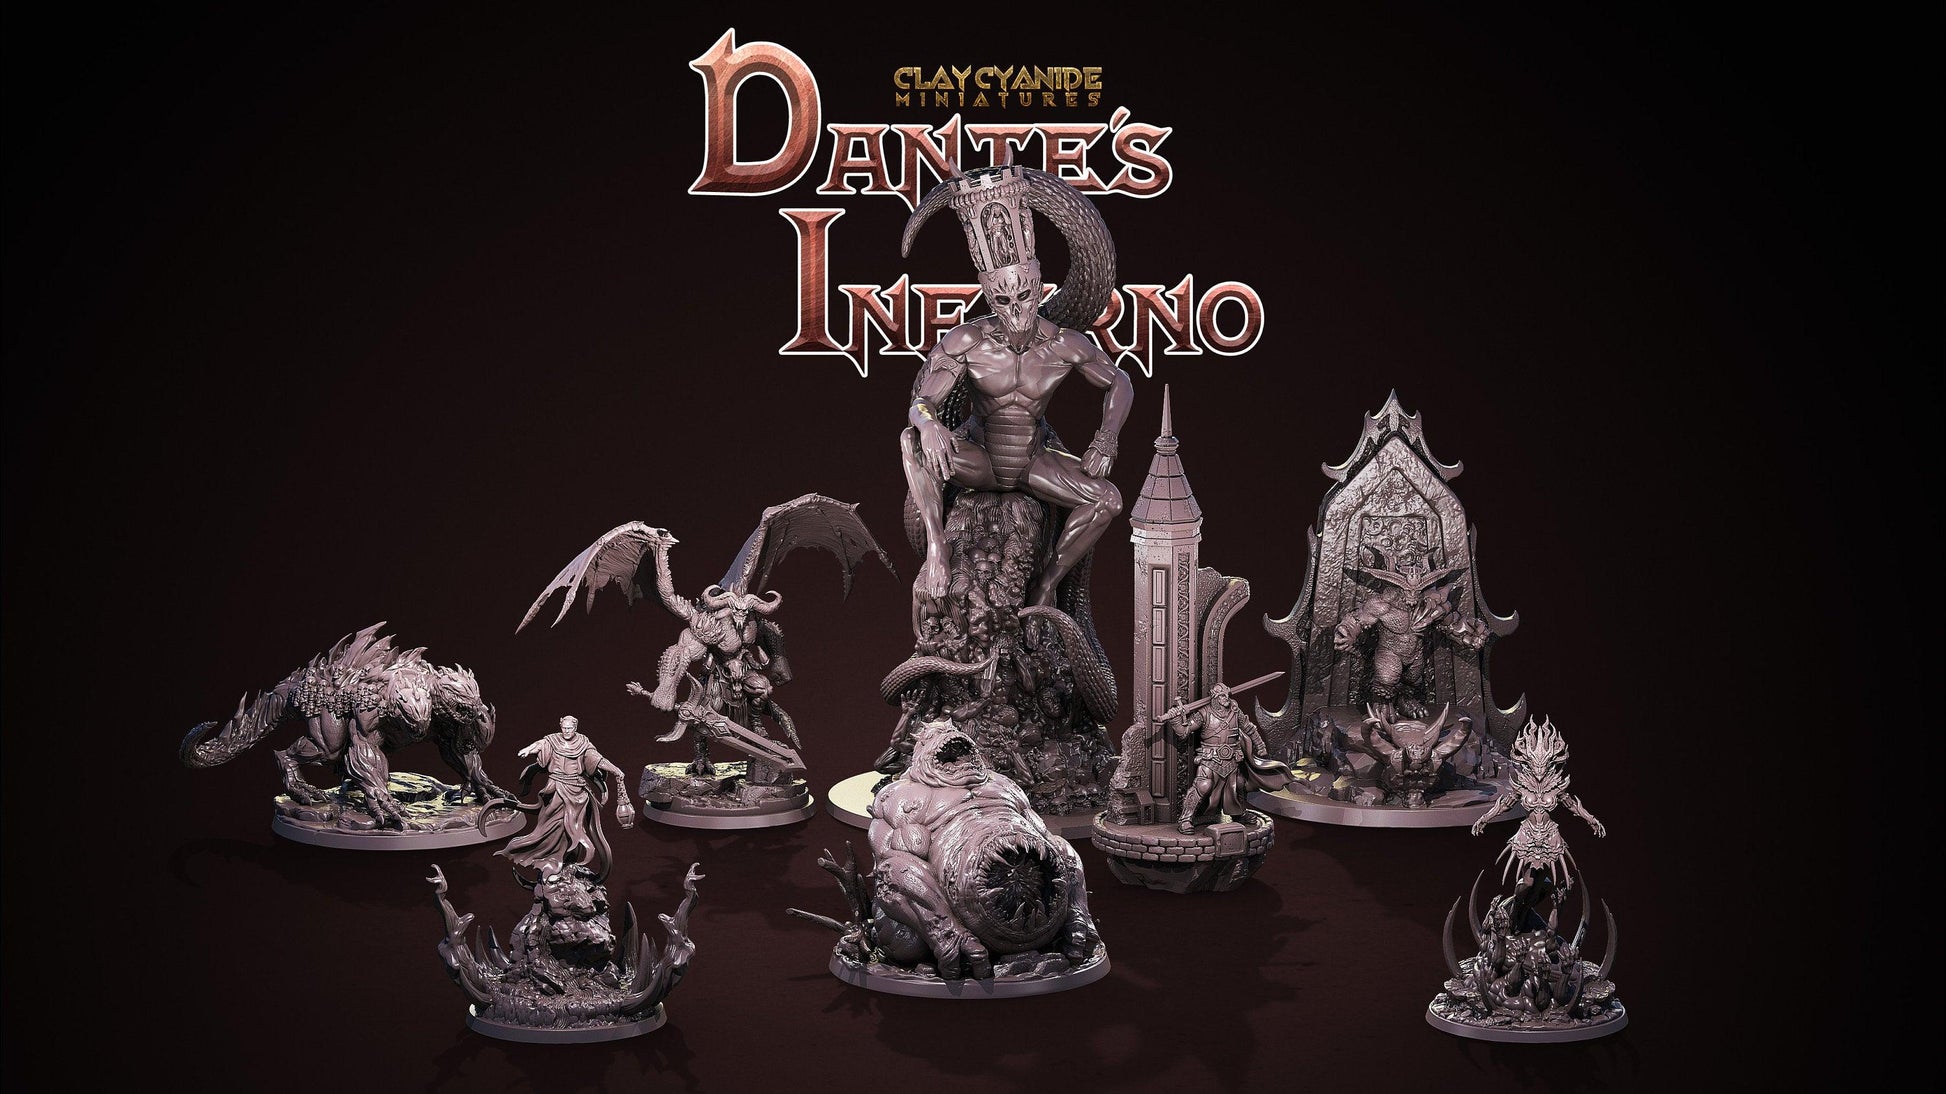 Dante Miniature | Clay Cyanide | Dante's Inferno | Tabletop Gaming | DnD Miniature | Dungeons and Dragons dnd 5e damned - Plague Miniatures shop for DnD Miniatures